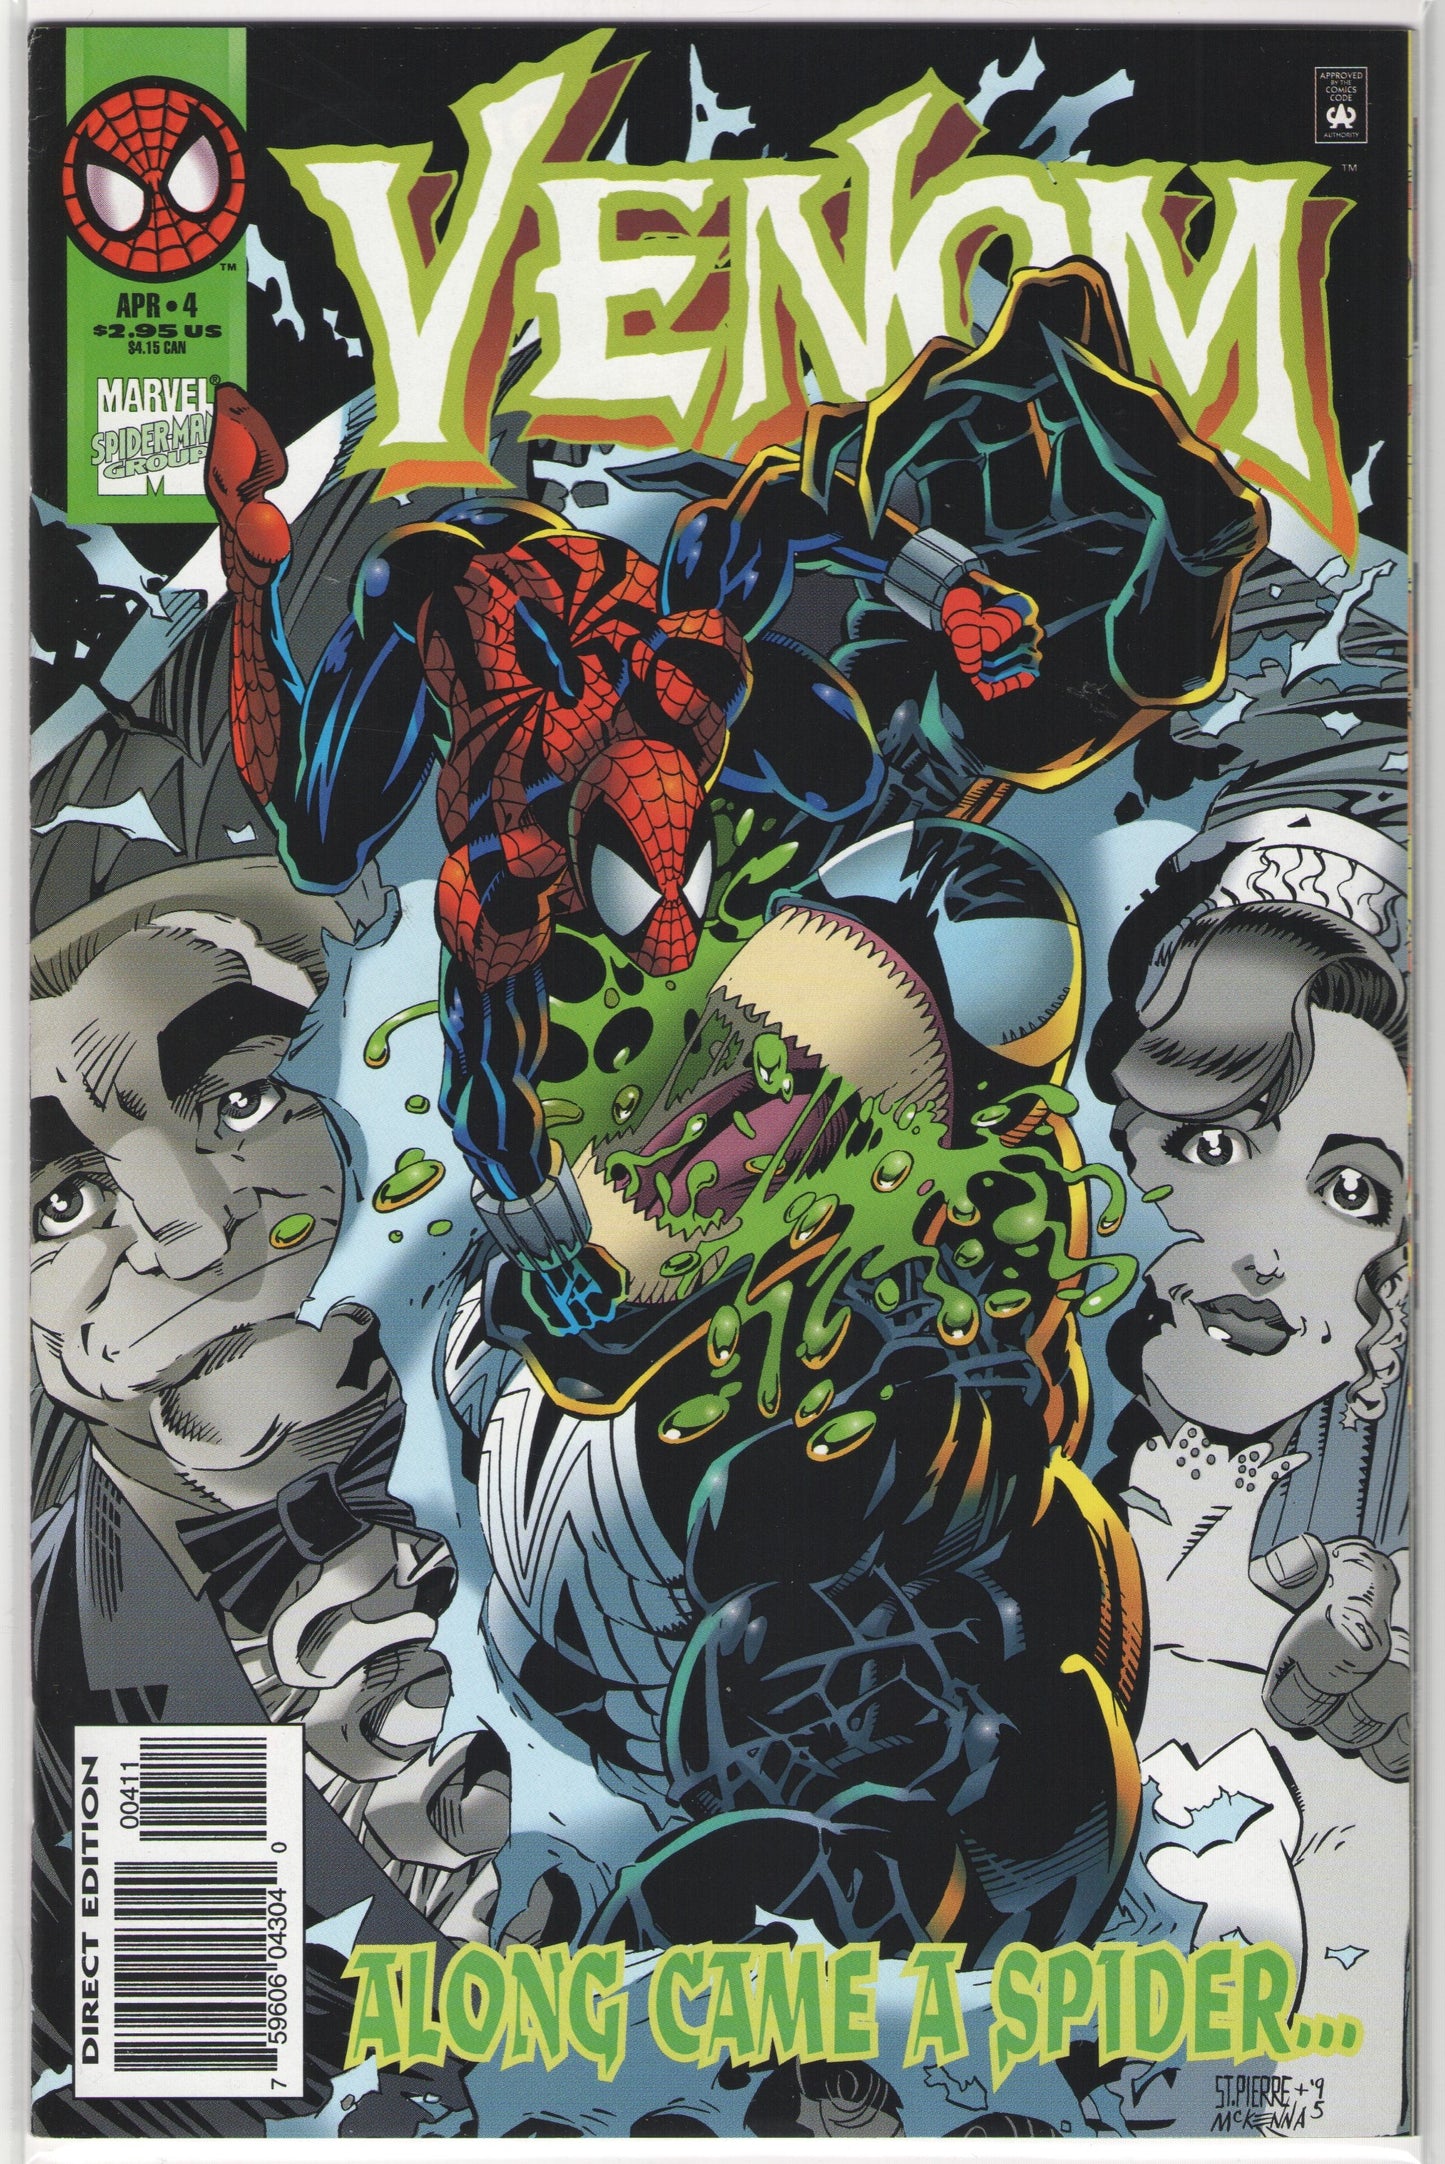 Venom: Along Came a Spider (1995) Complete Limited Series